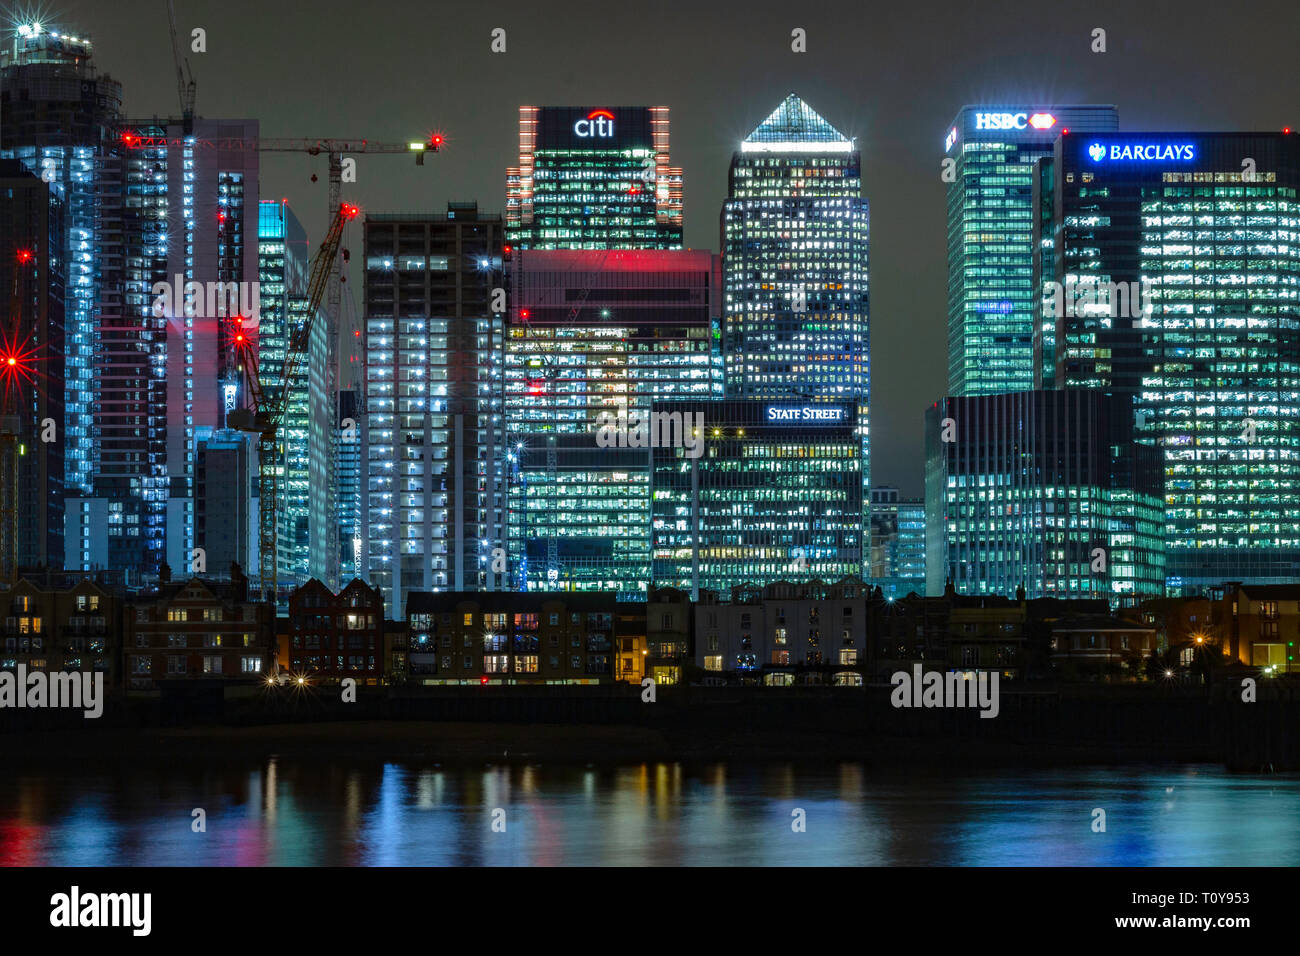 Canary Wharf, London, England, March 21 2019. A night shot of the 'square mile' financial district of the city across the river Thames with buildings Stock Photo